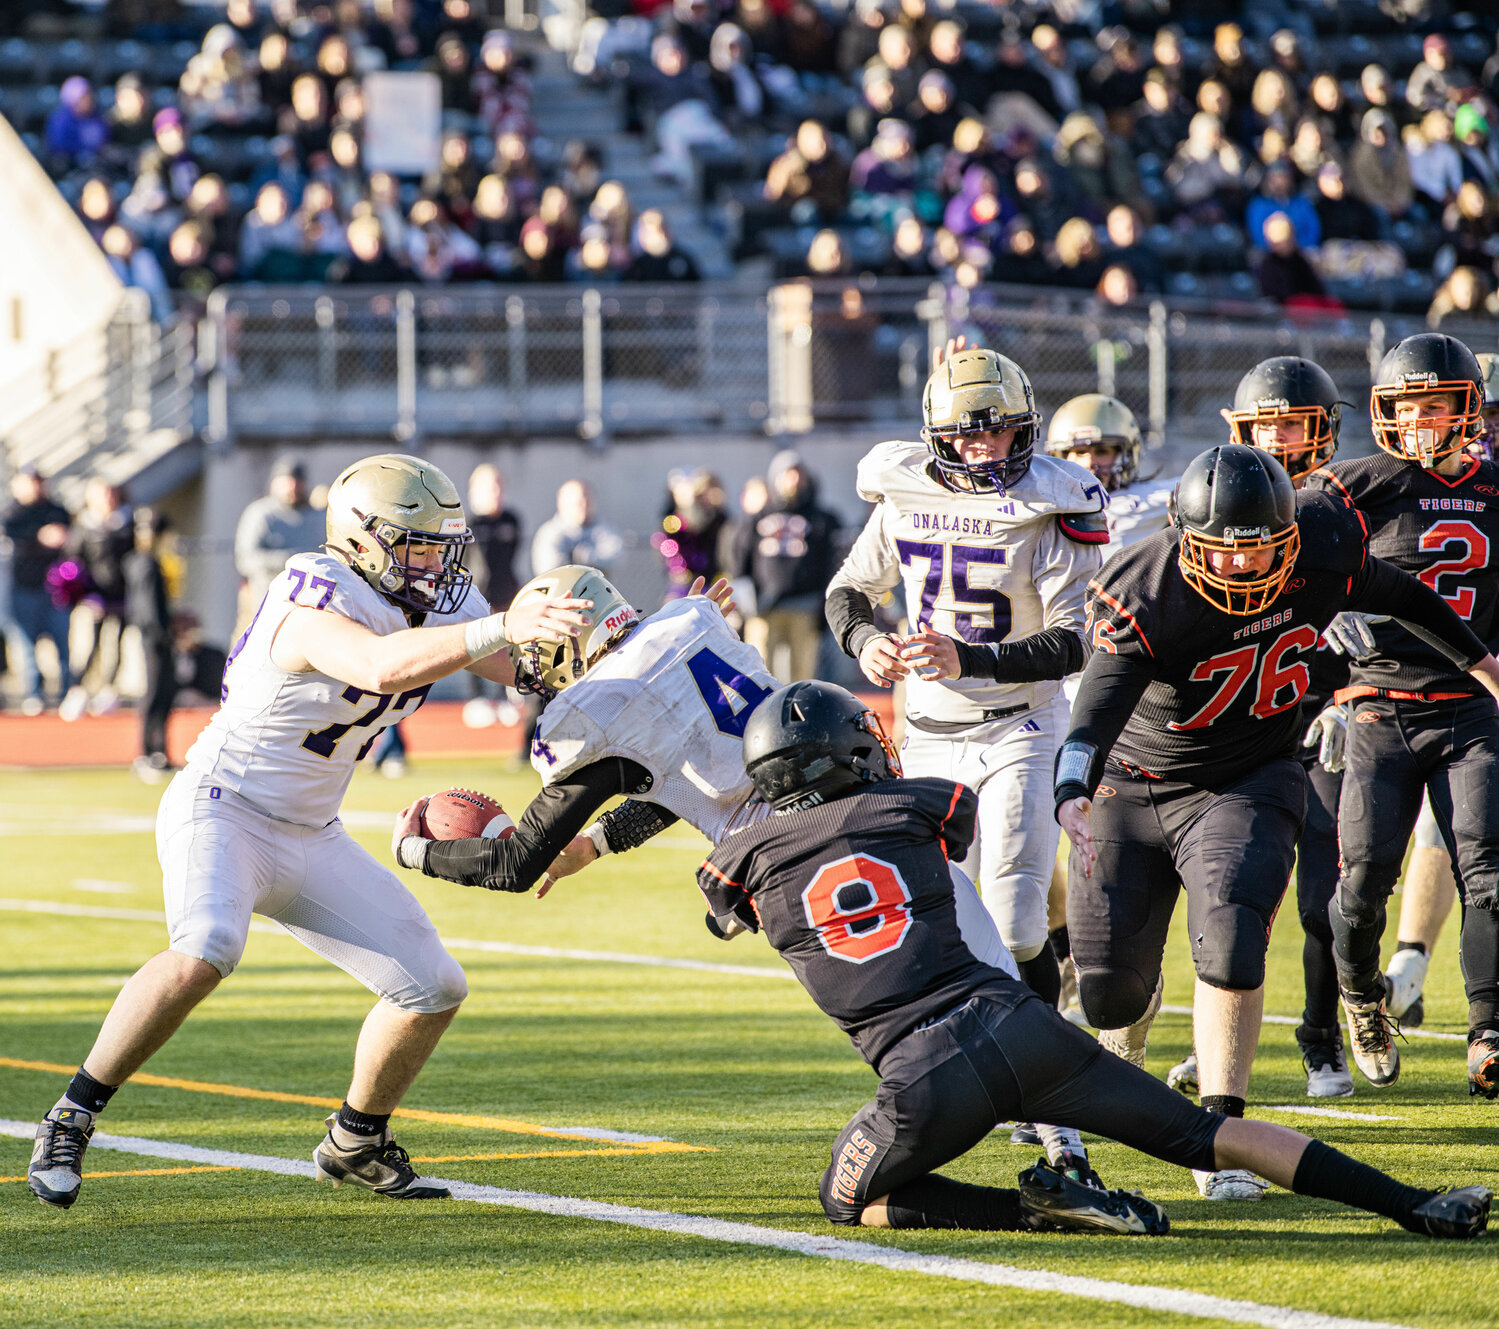 Onalaska’s Lane Sandell (77) reaches toward quarterback Kayden Mozingo (4) to pull him over the line into the end zone at the 2B state semifinals matchup against Napavine in Tumwater on Saturday.